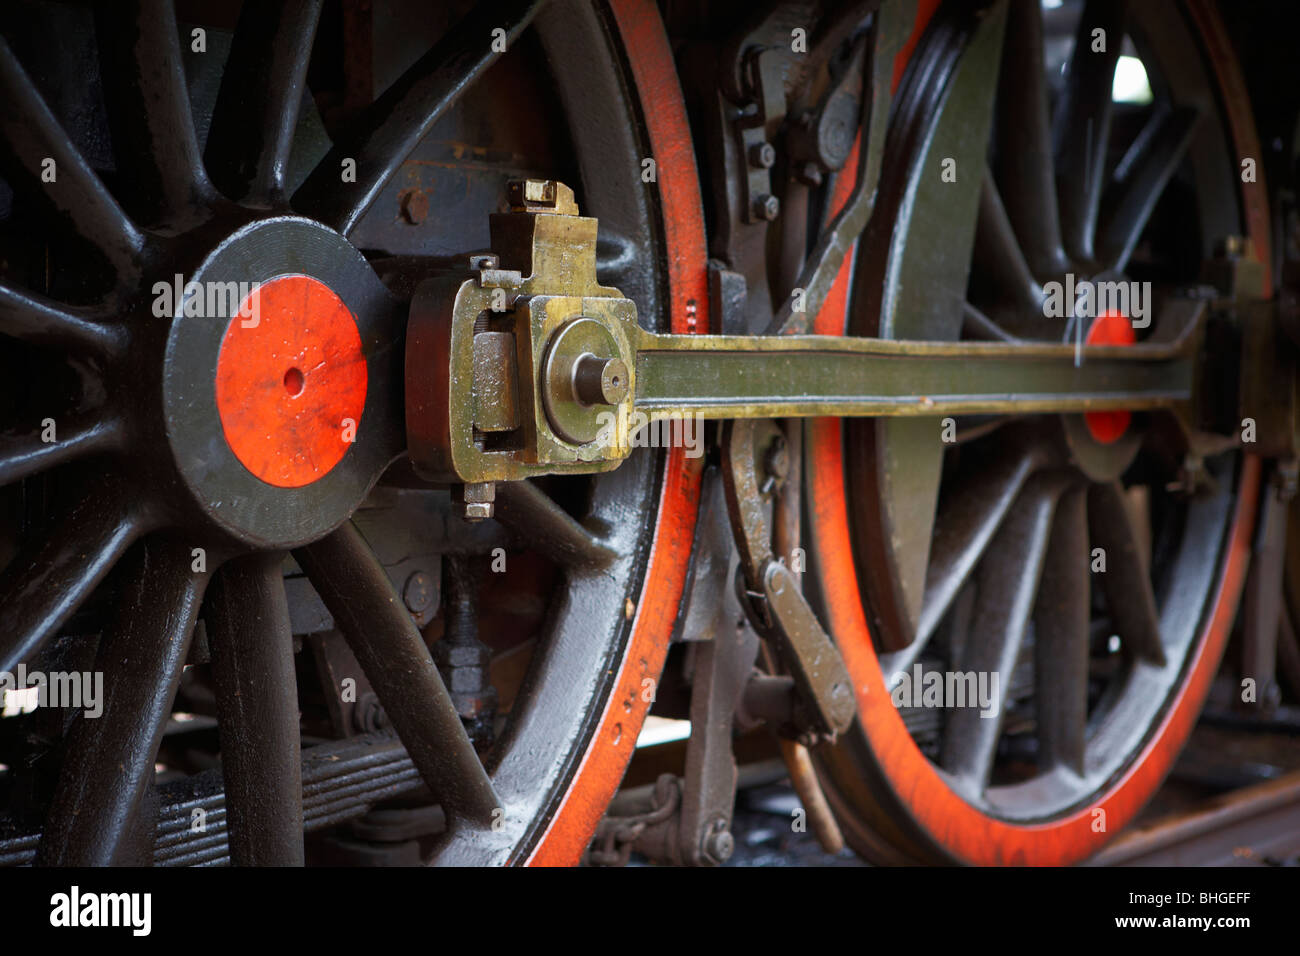 The wheels of an old black steam engine, Sweden. Stock Photo